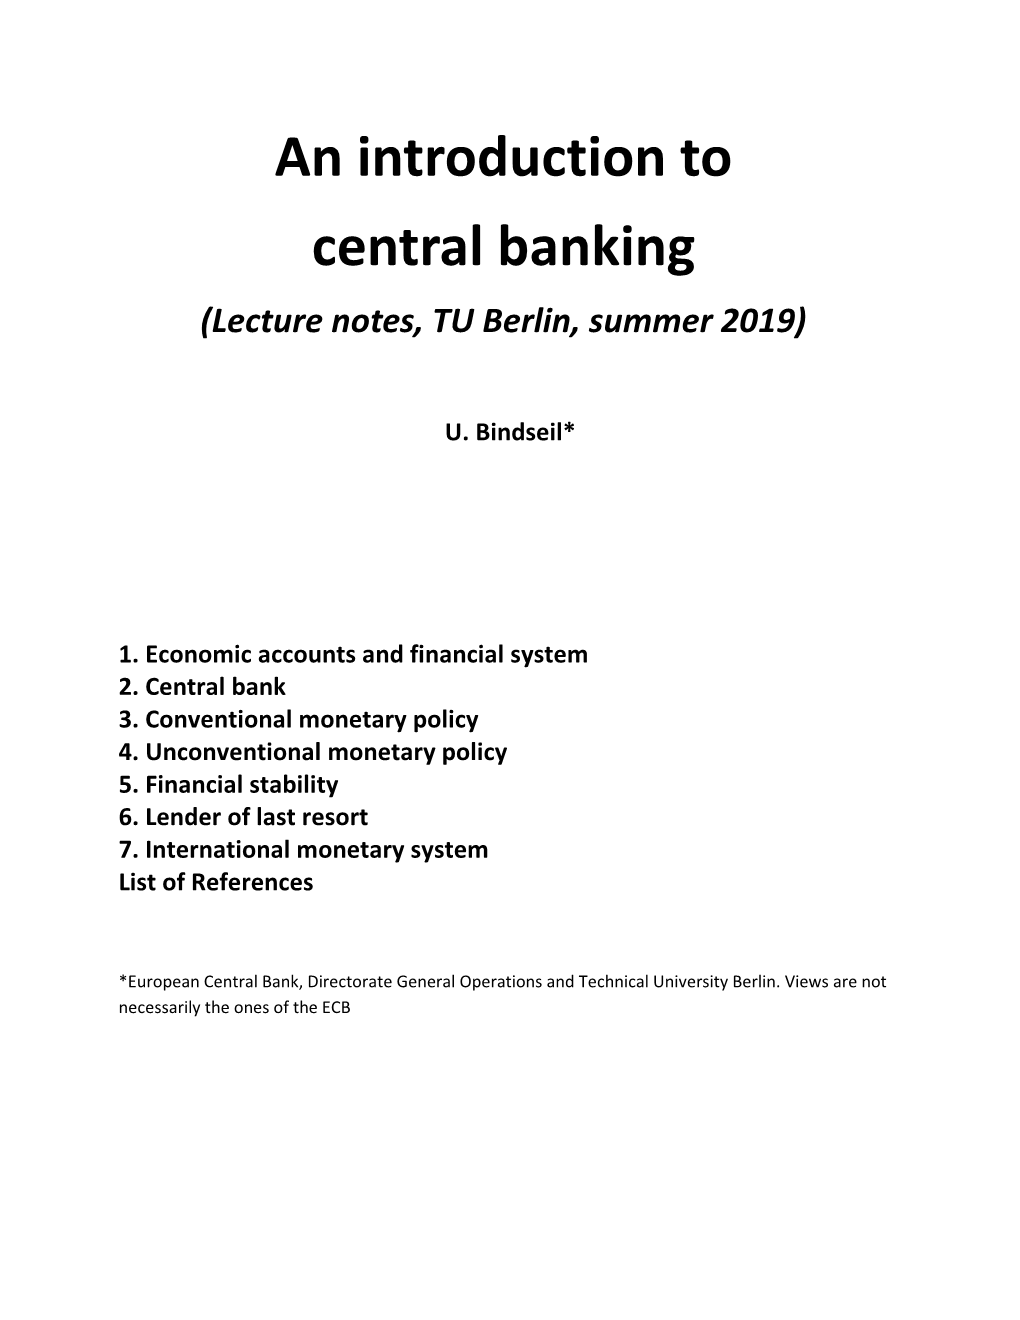 Central Banking (Lecture Notes, TU Berlin, Summer 2019)